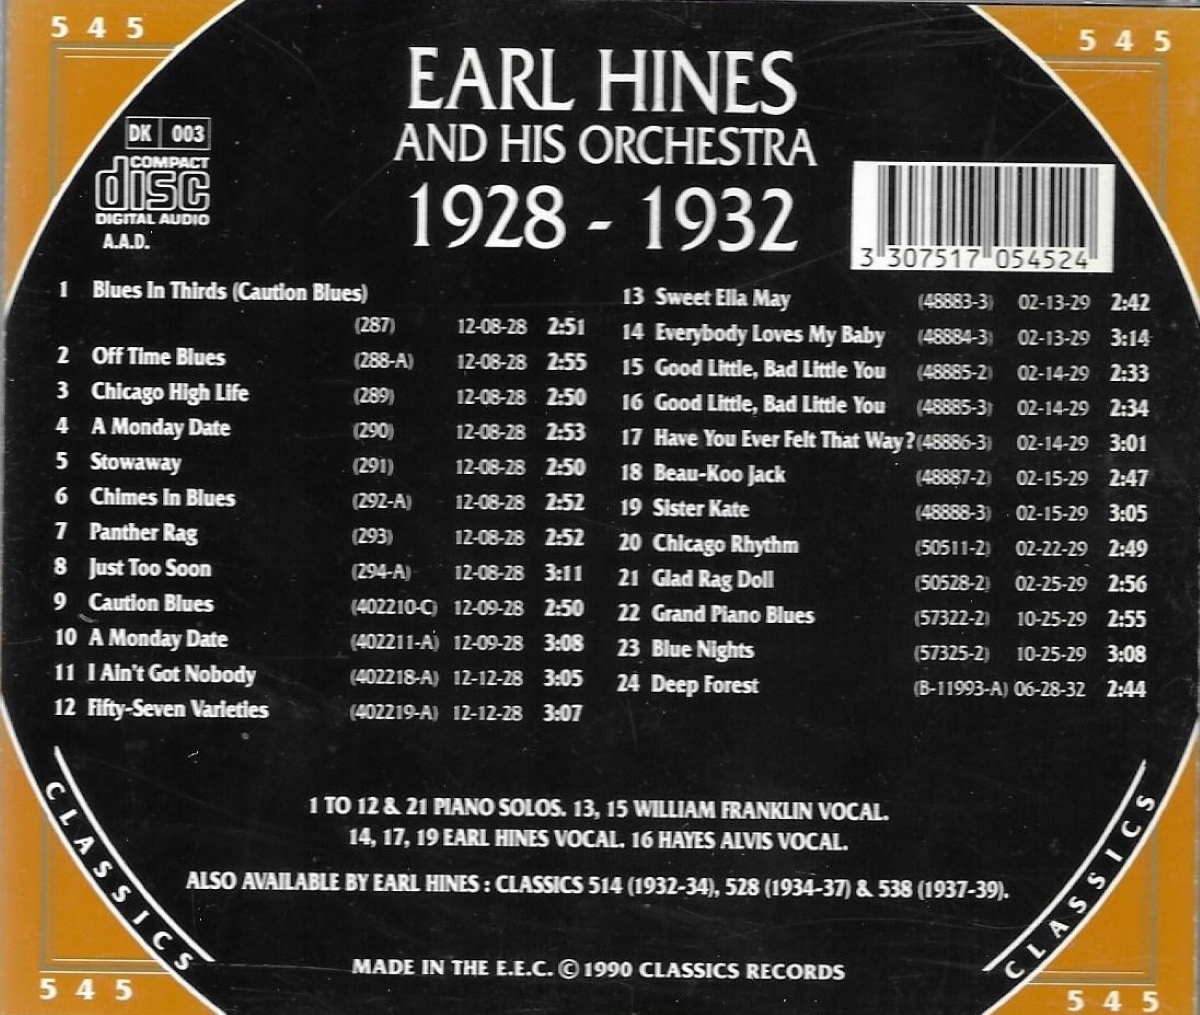 The Chronological Earl Hines and His Orchestra-1928-1932